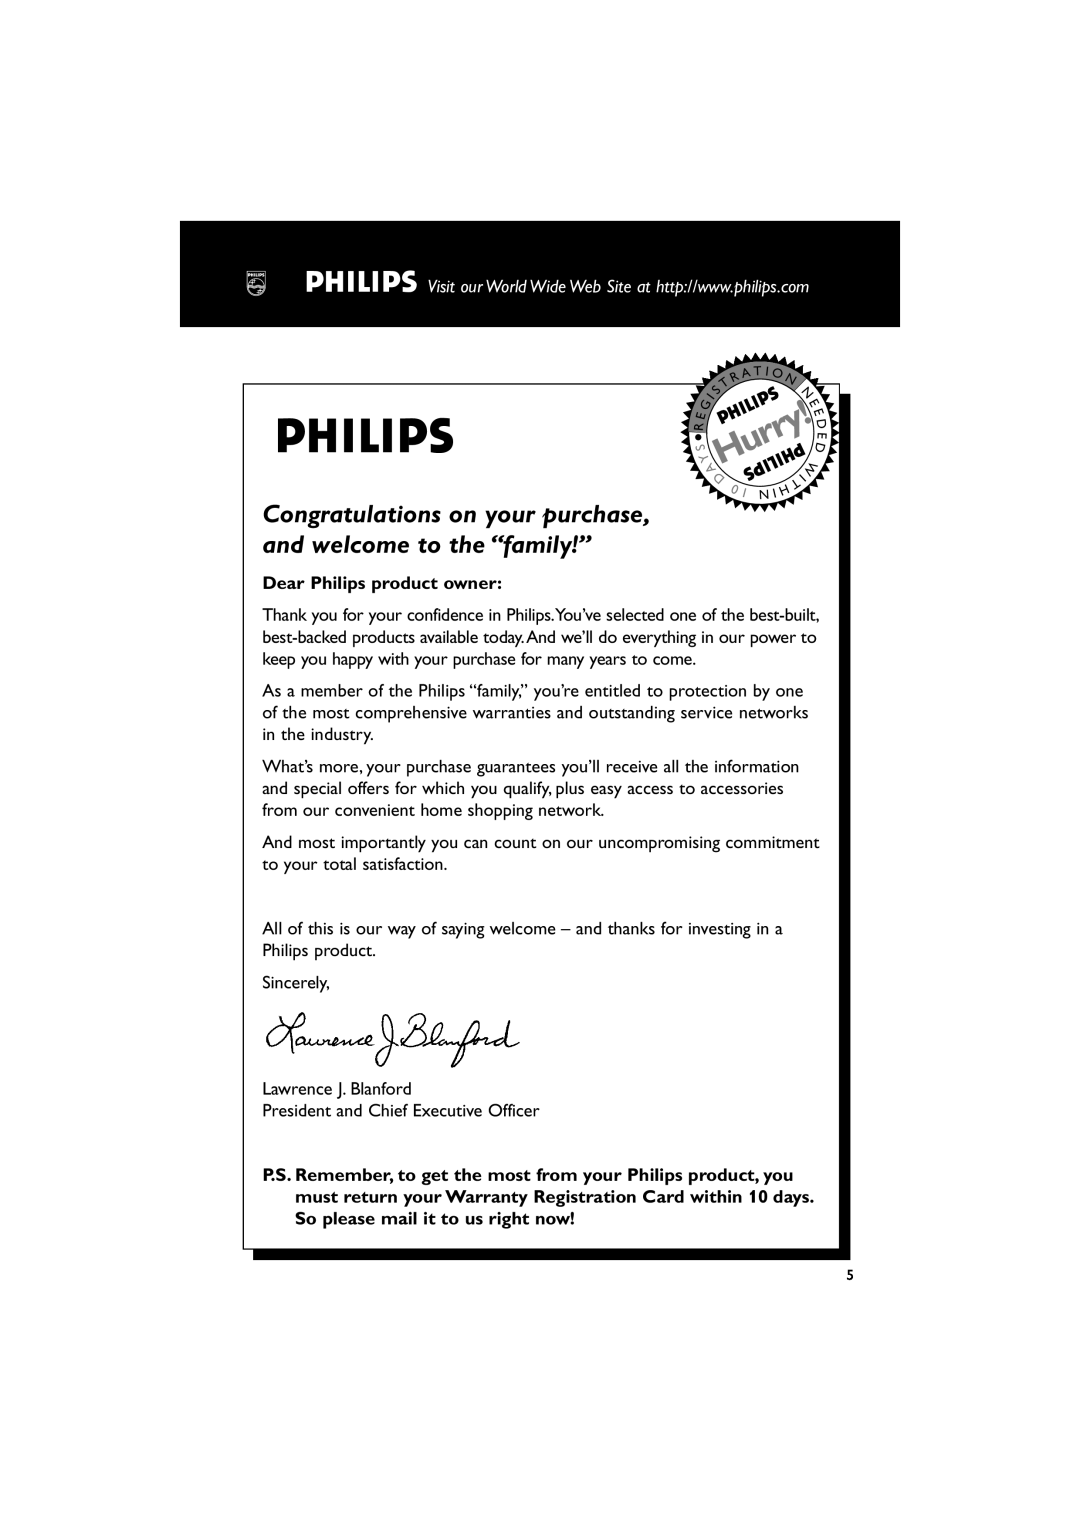 Philips FWM779 warranty Dear Philips product owner, AHurry 